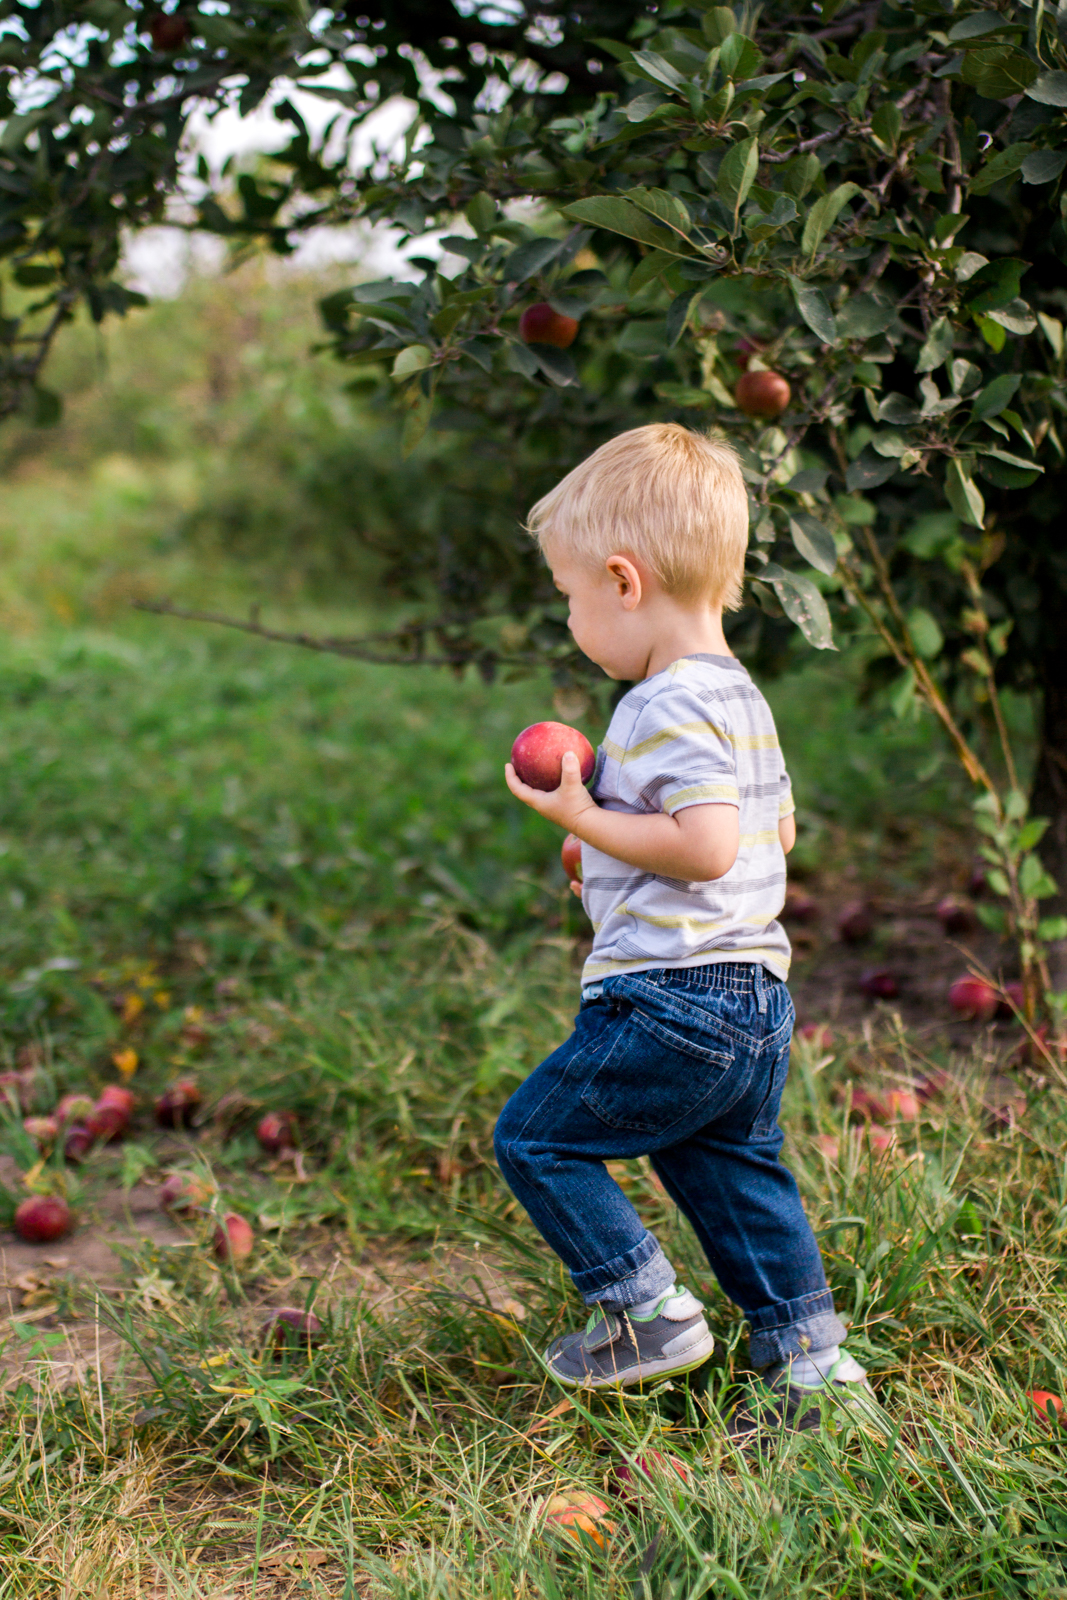  Rebecca Clair Photography, Kansas City lifestyle photographer, apple picking photo session, apple orchard photos, Kansas City family photographer, boy carrying apples 